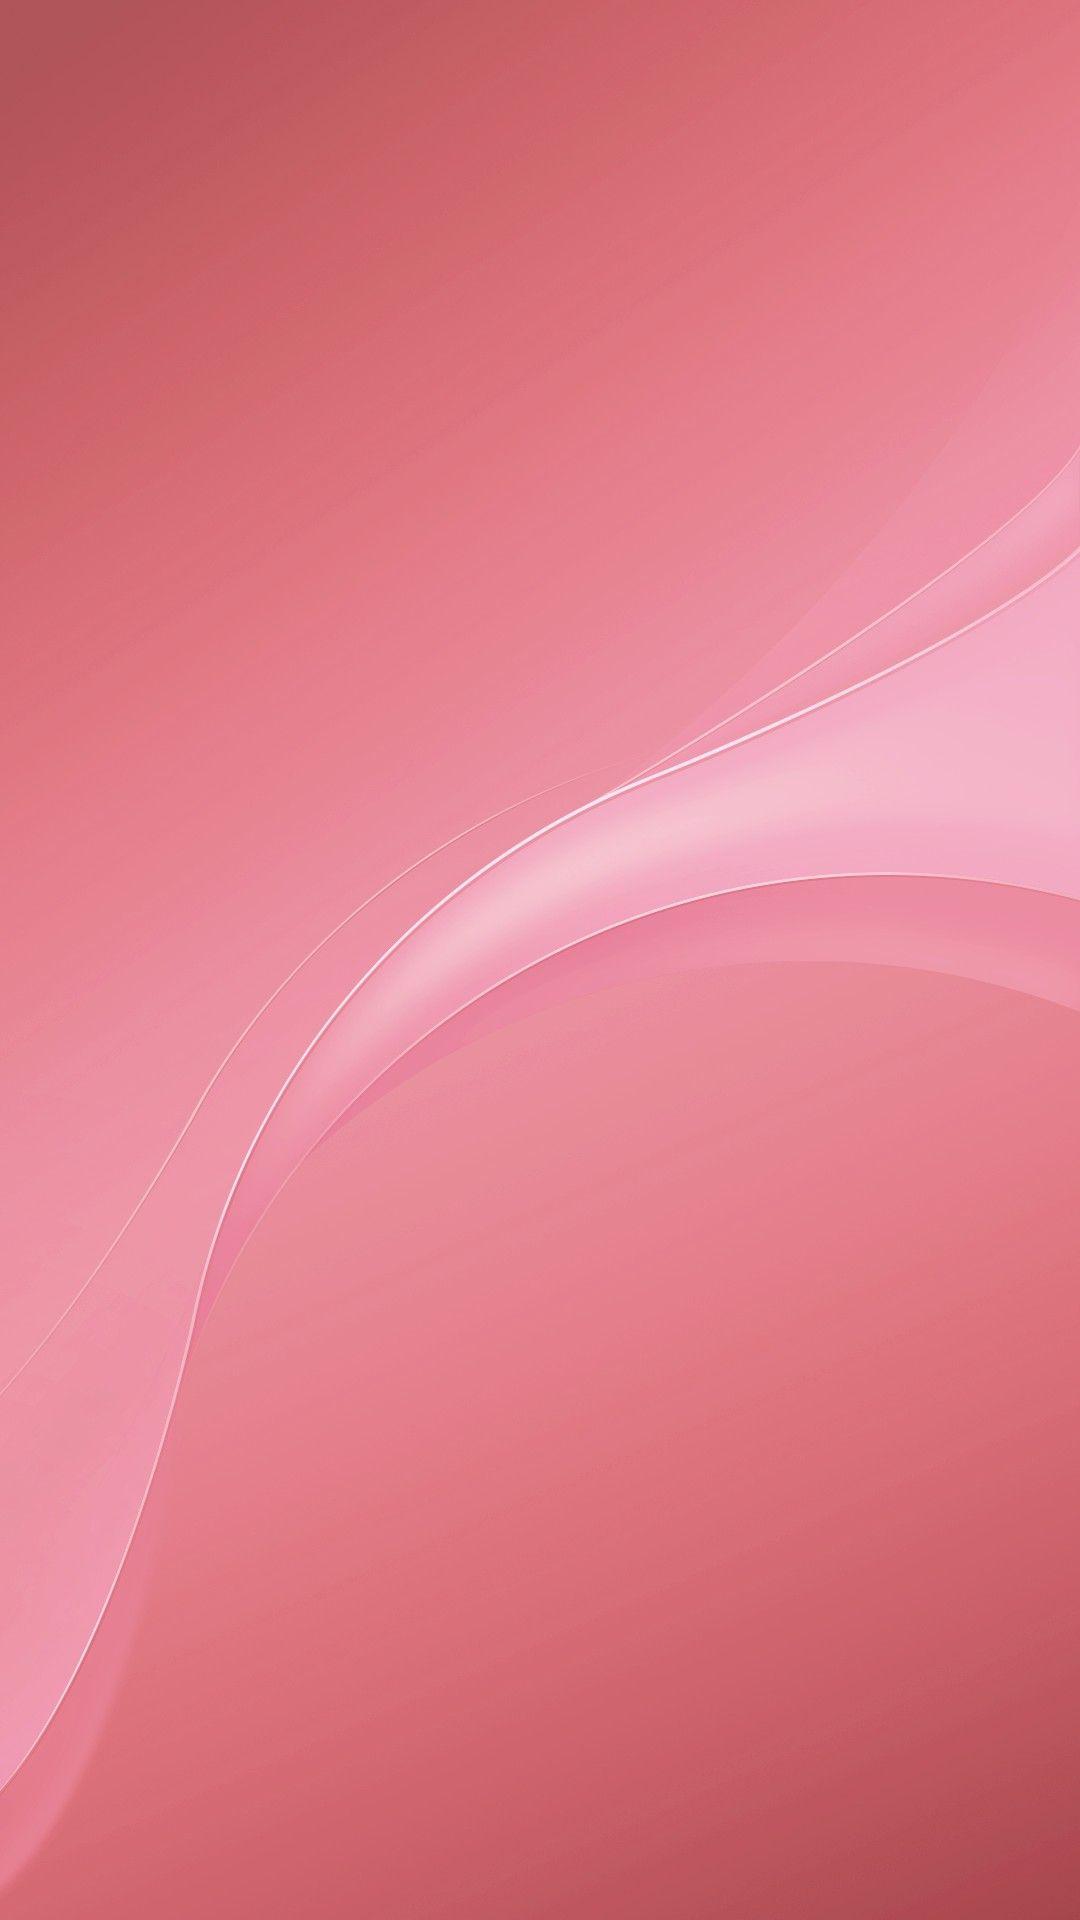 Pink Abstract Wallpaper. Cool wallpaper for phones, Phone wallpaper, Pretty phone wallpaper